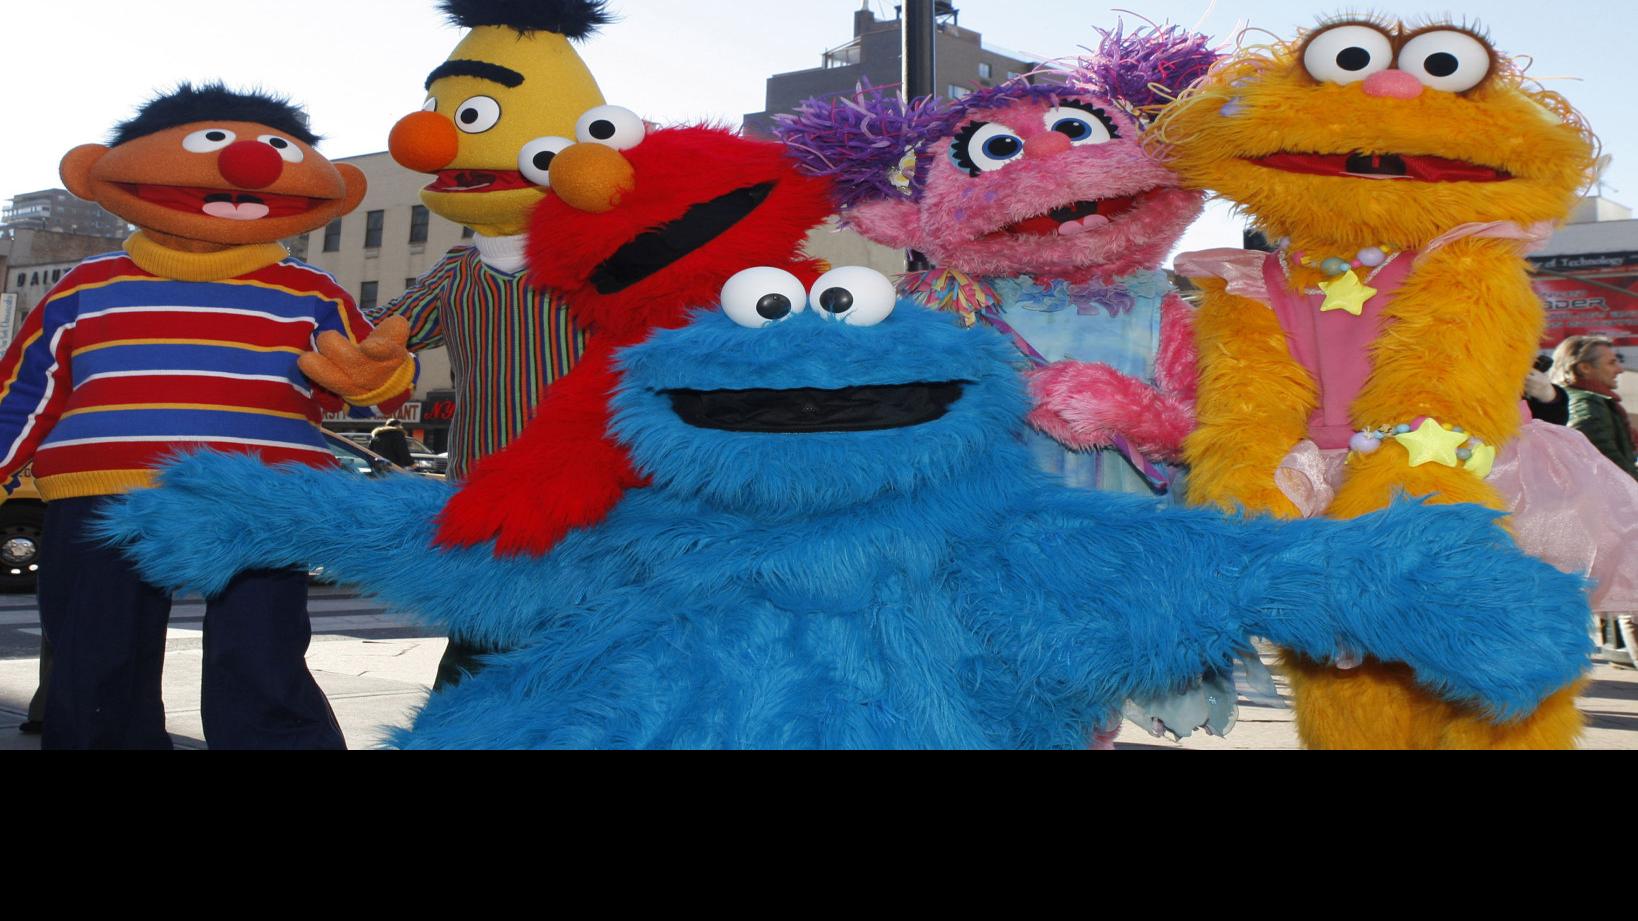 7 surprising facts you might not know about 'Sesame Street